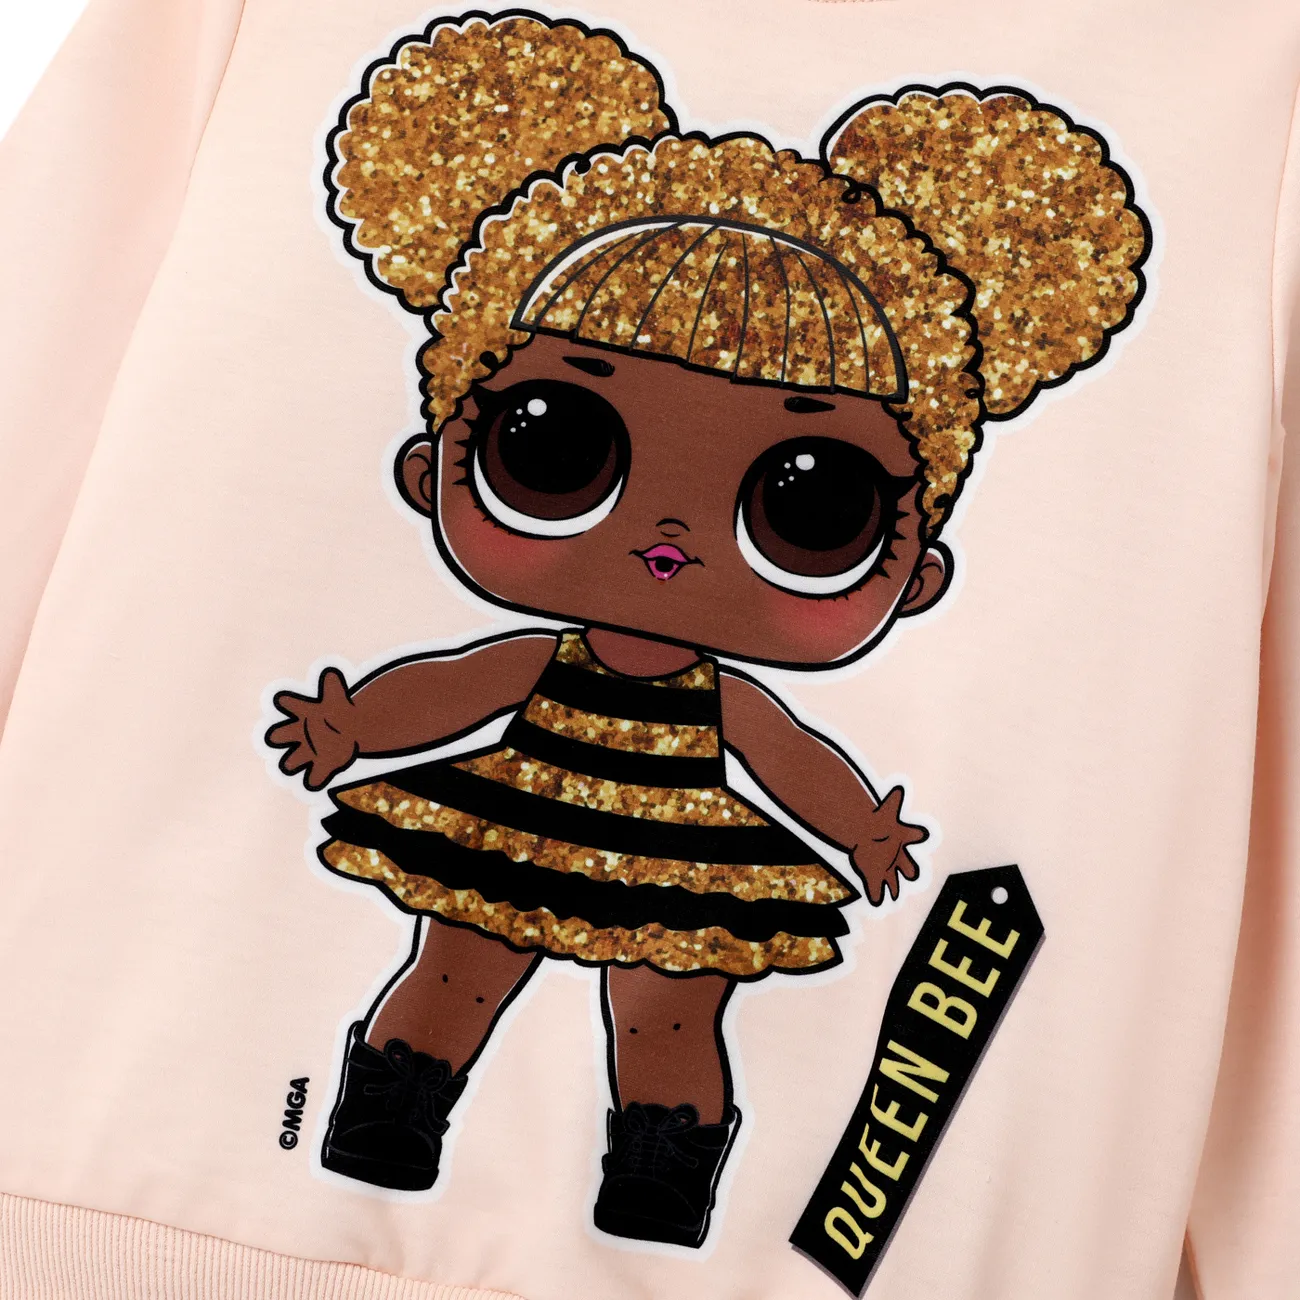 L.O.L. SURPRISE! Kid Girl Letter Characters Print Pullover Sweatshirt Apricot big image 1